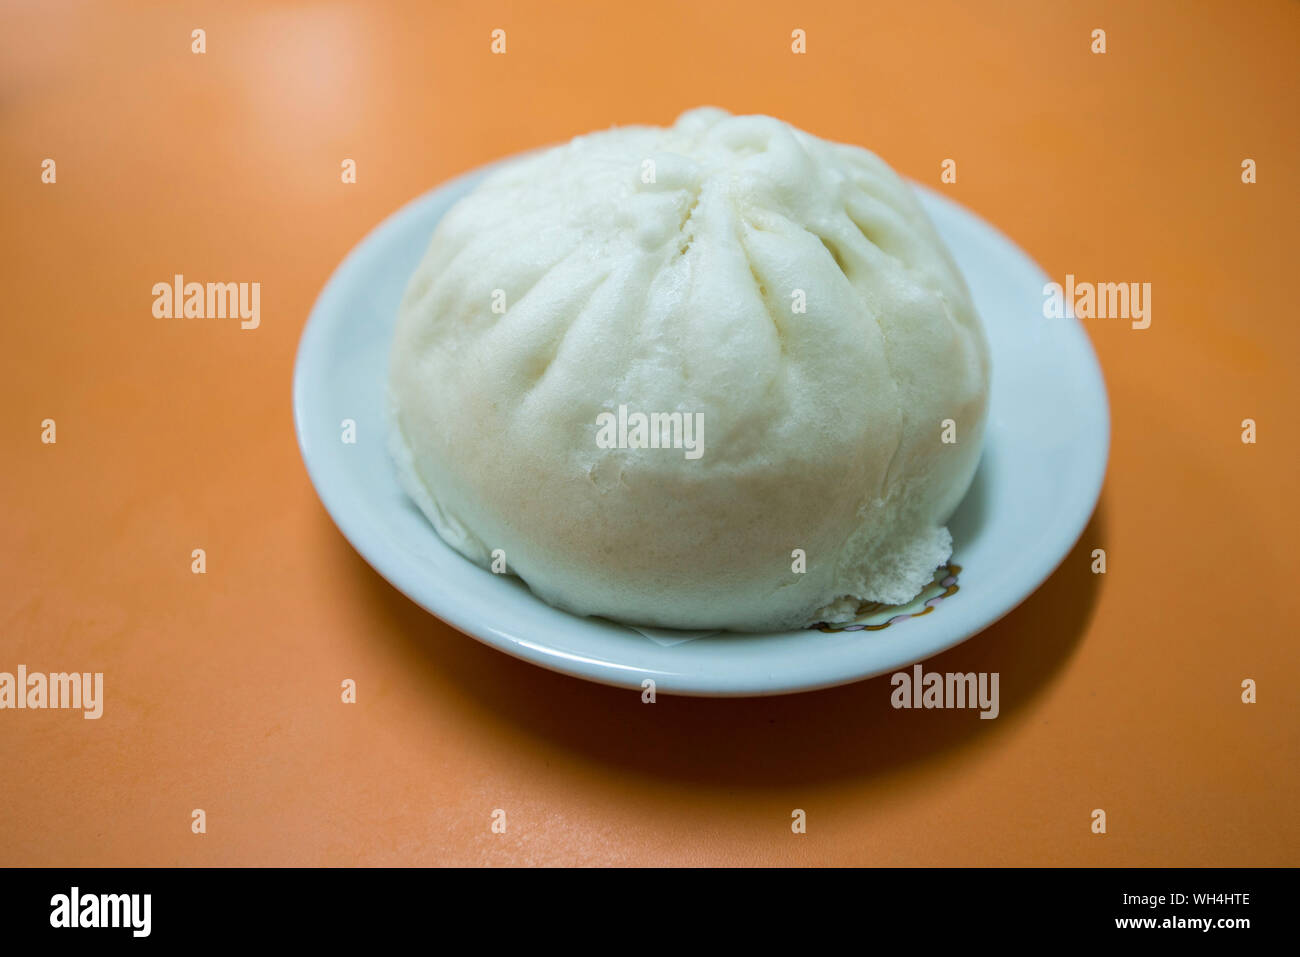 Close-up Of Dumpling In Plate On Table Stock Photo